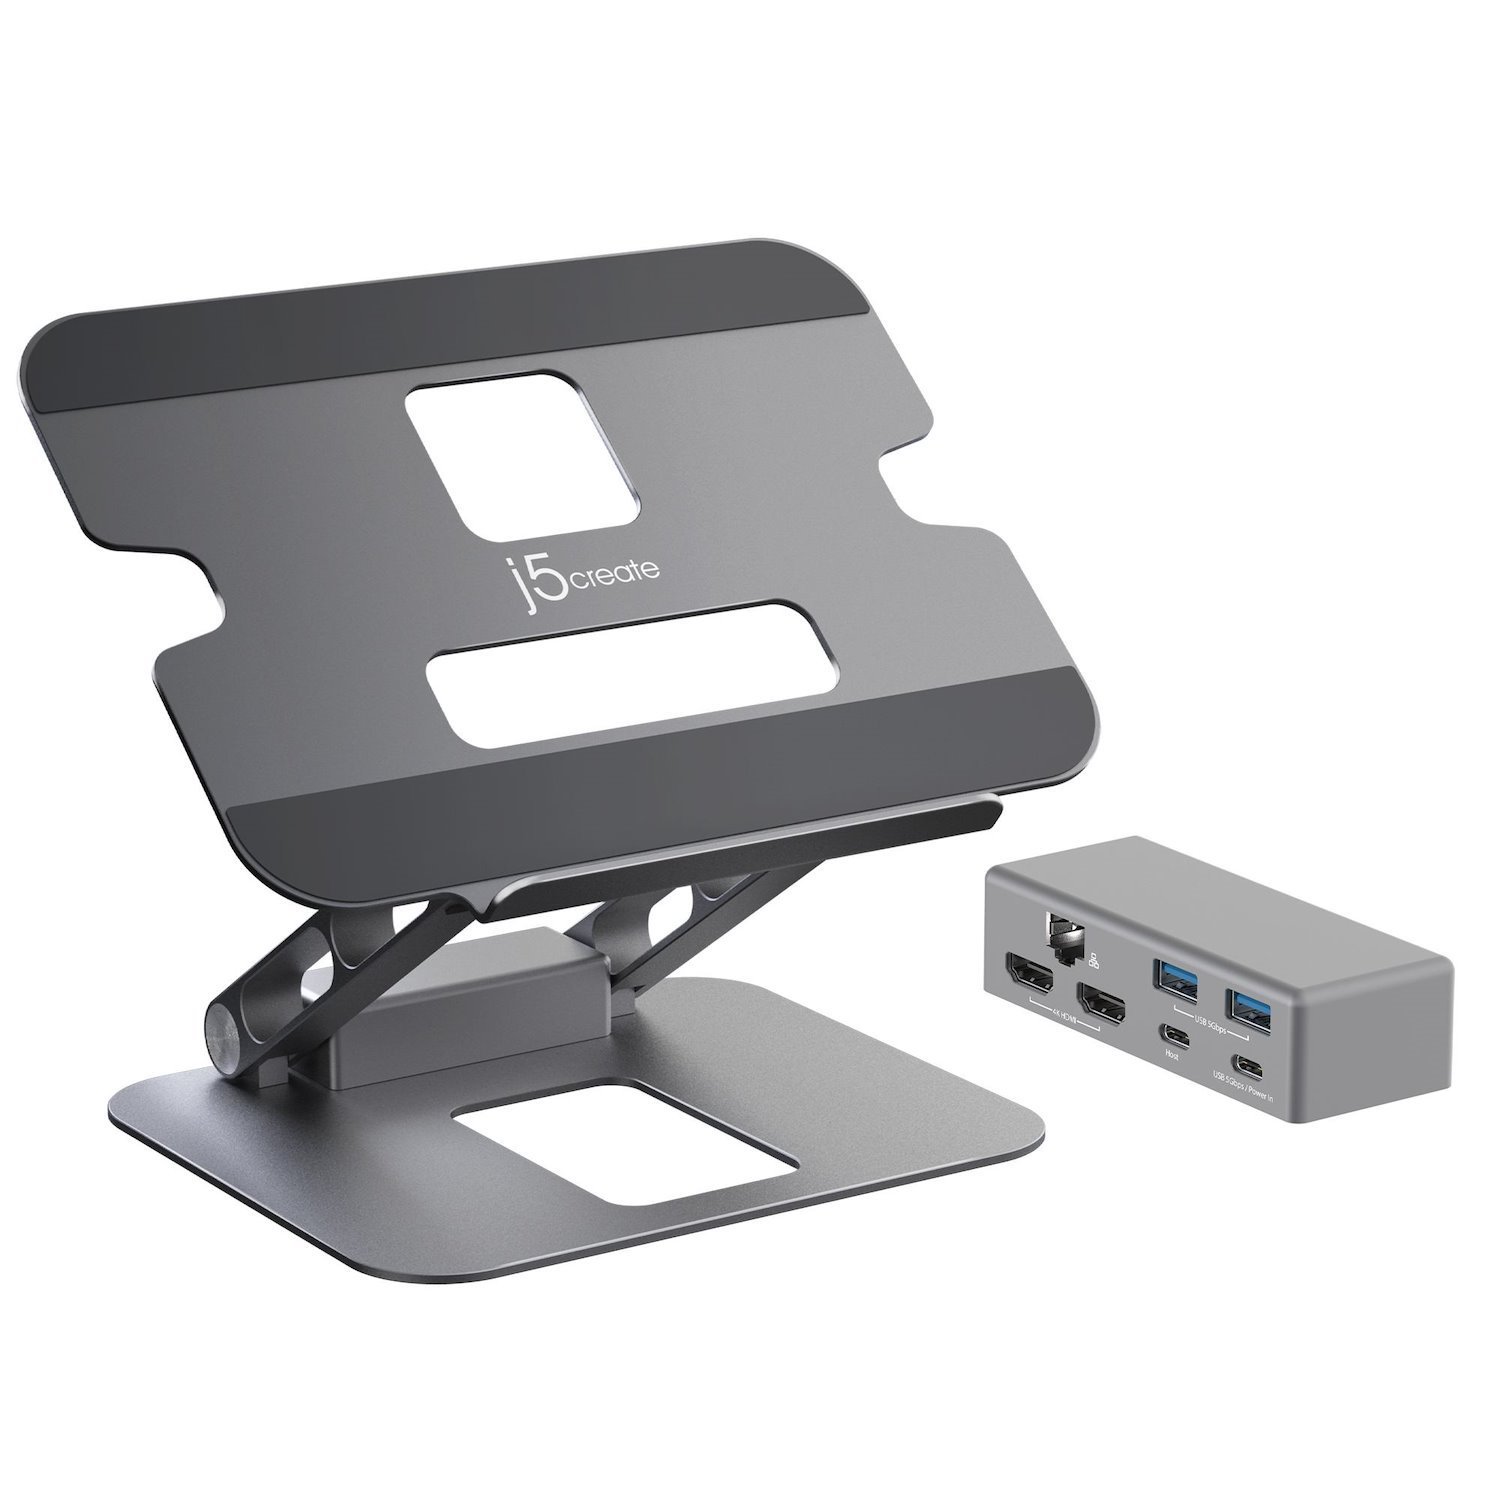 j5create USB Type C Docking Station for Notebook/Tablet PC - 100 W - Space Gray